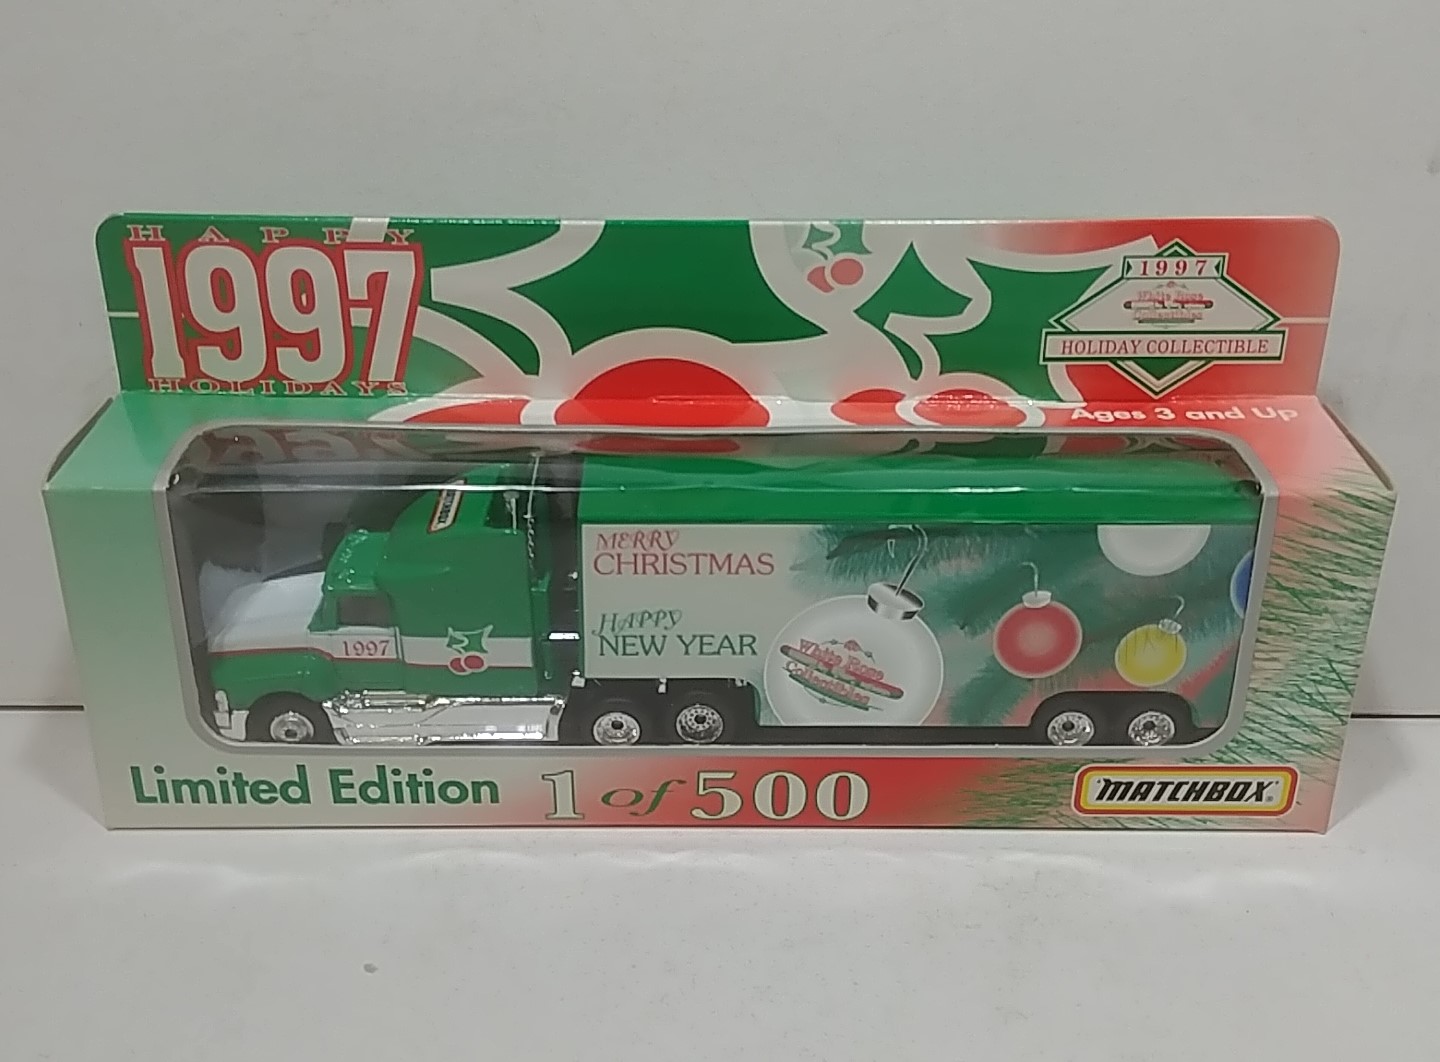 1997 Merry Christmas 1/87th "Decorations on the Tree" Transporter